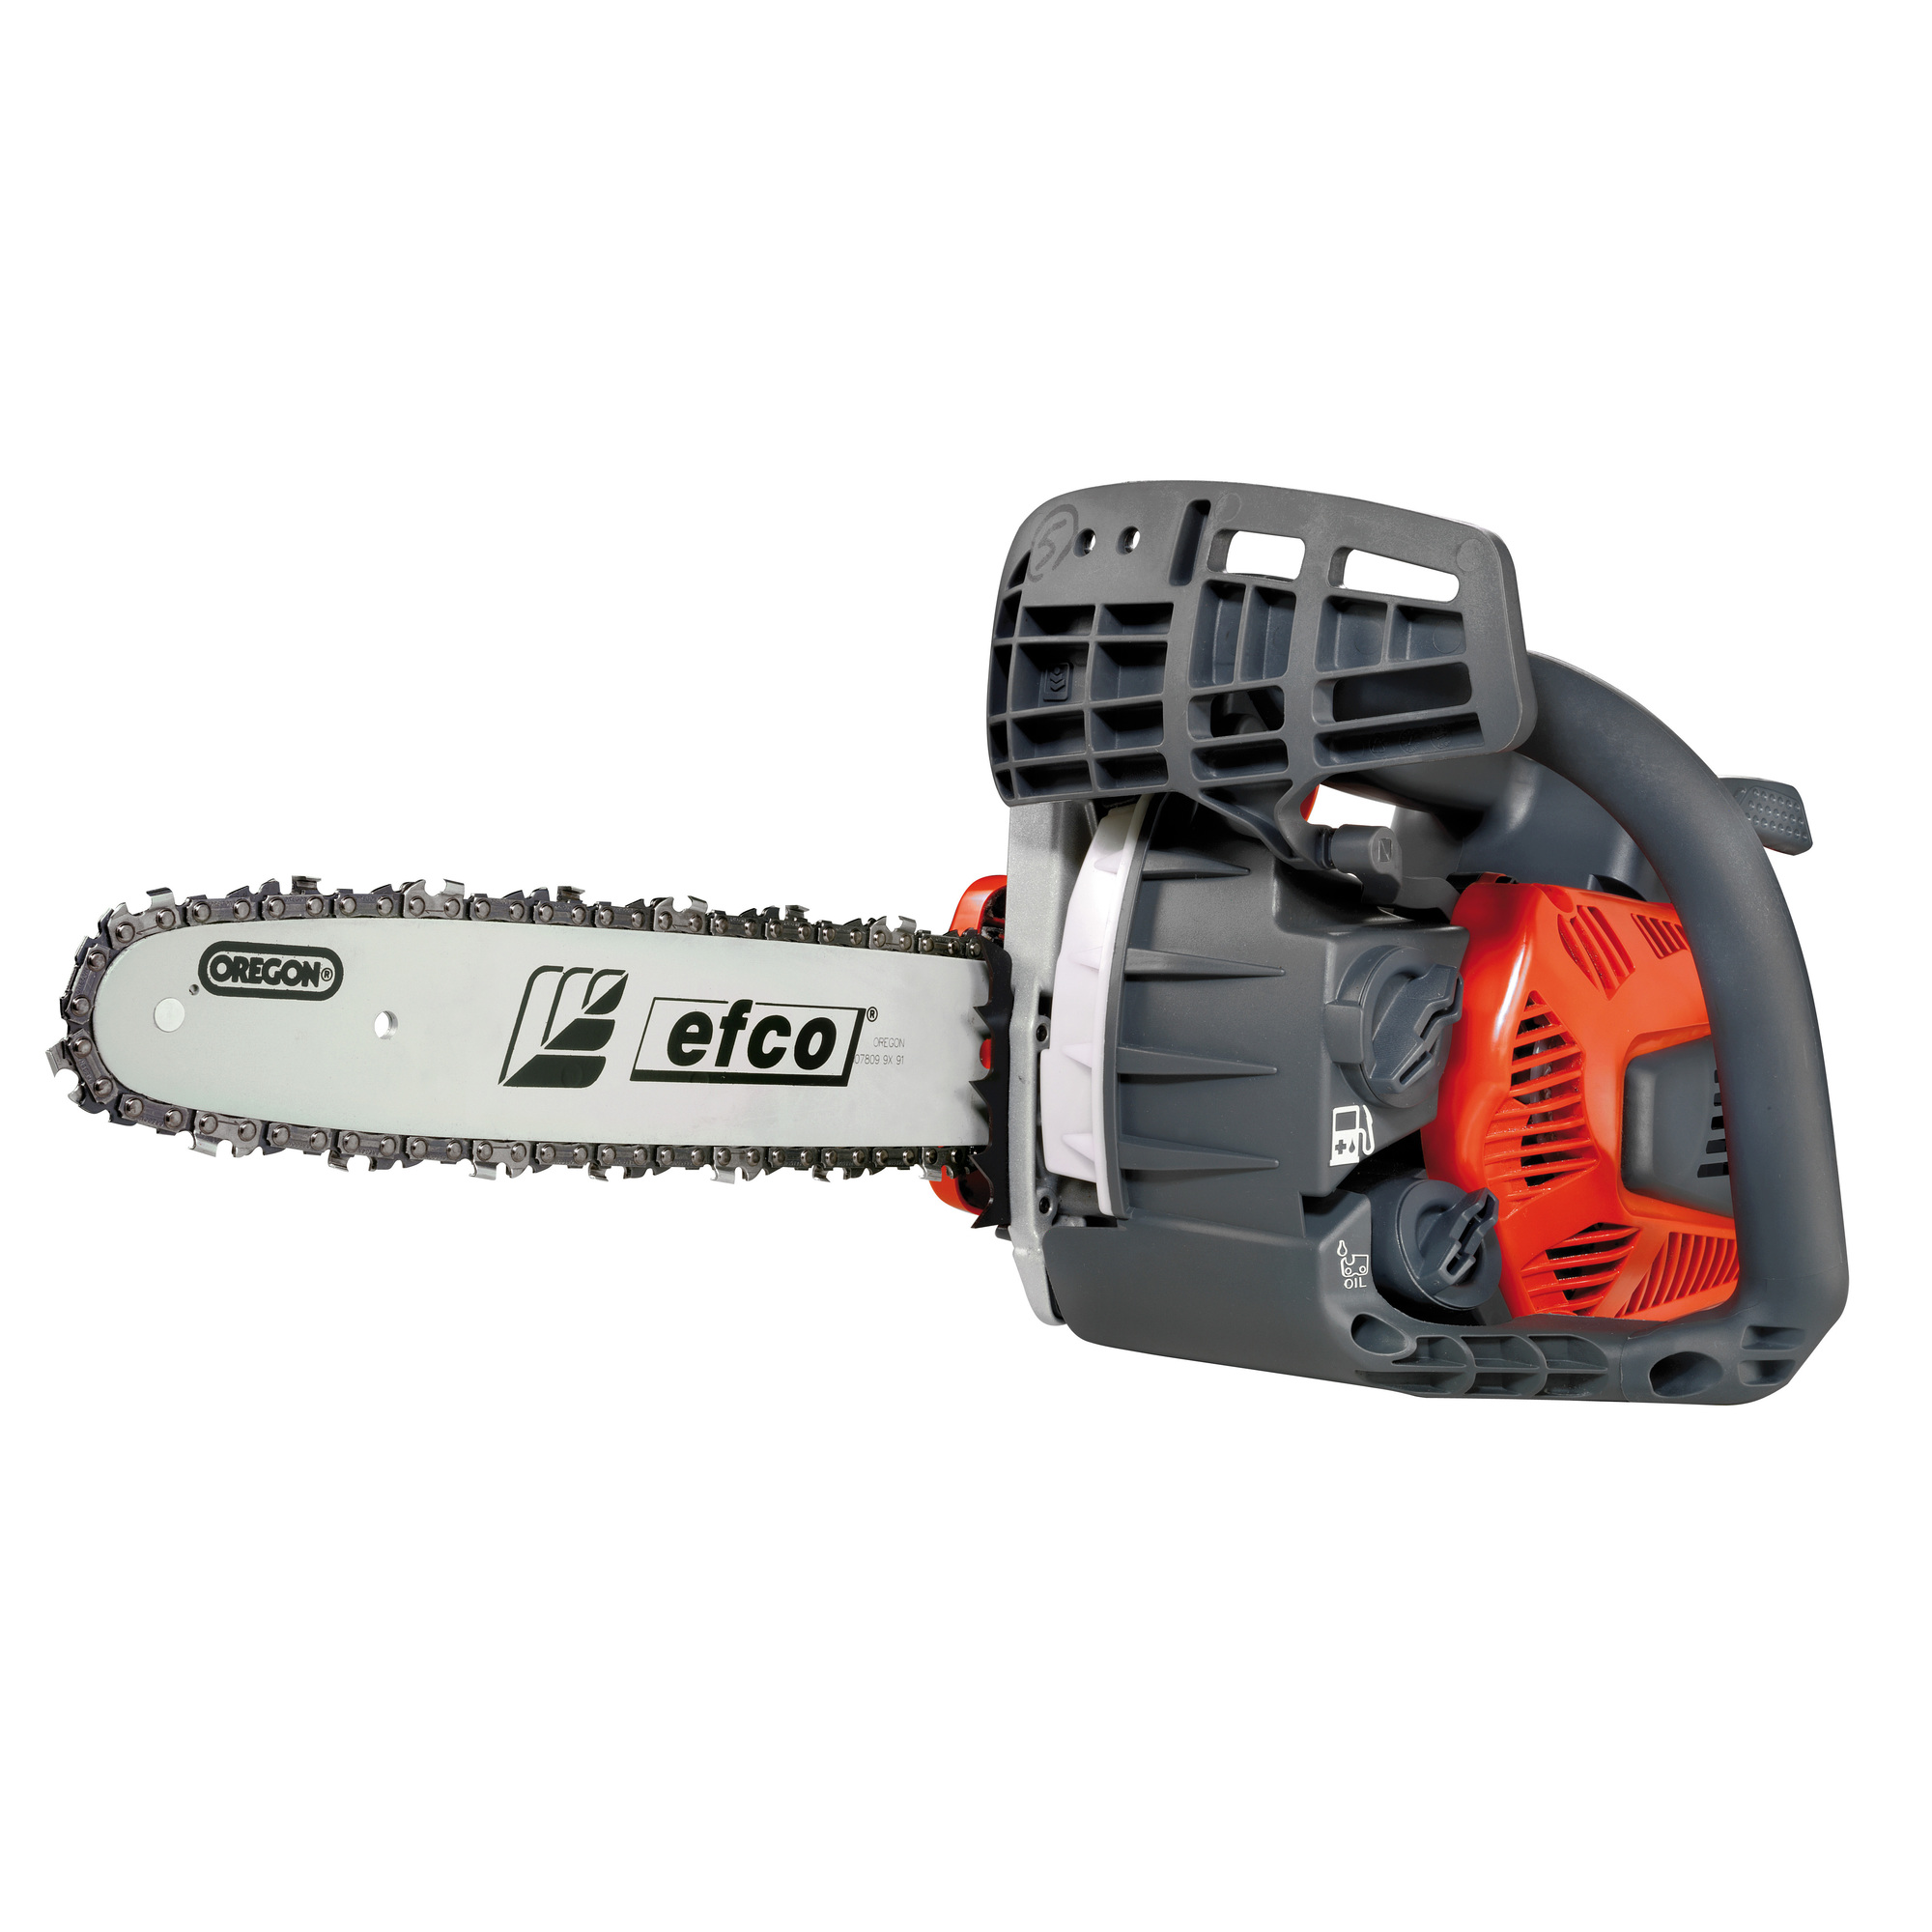 Efco, Professional Top Handle Arborist Chainsaw, Bar Length 14 in, Engine Displacement 35.44 cc, Model MTT3600-14